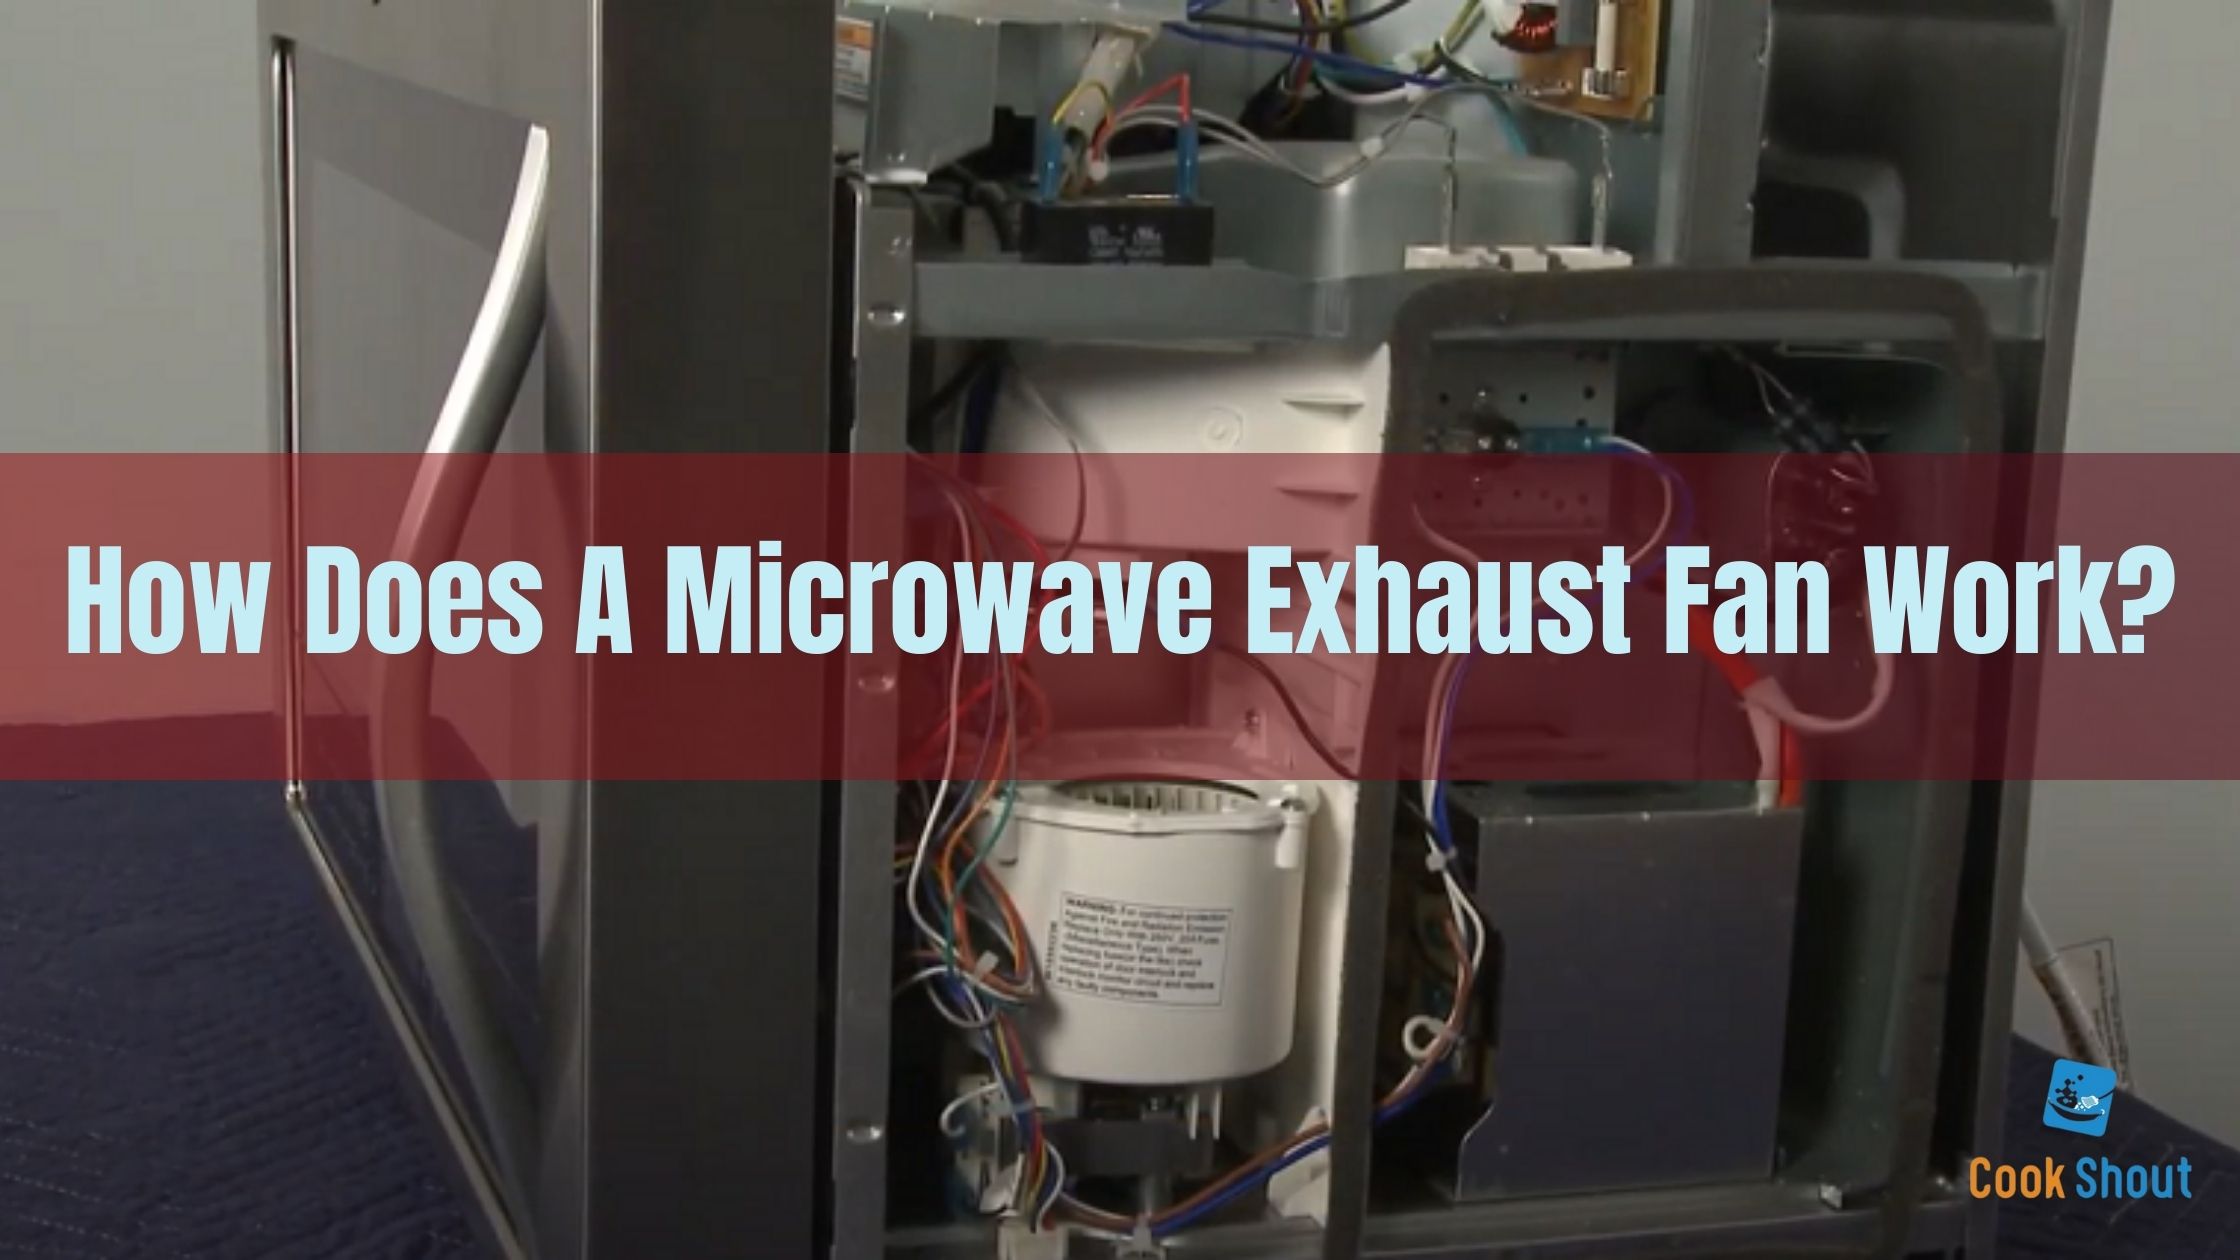 How Does A Microwave Exhaust Fan Work in 2021